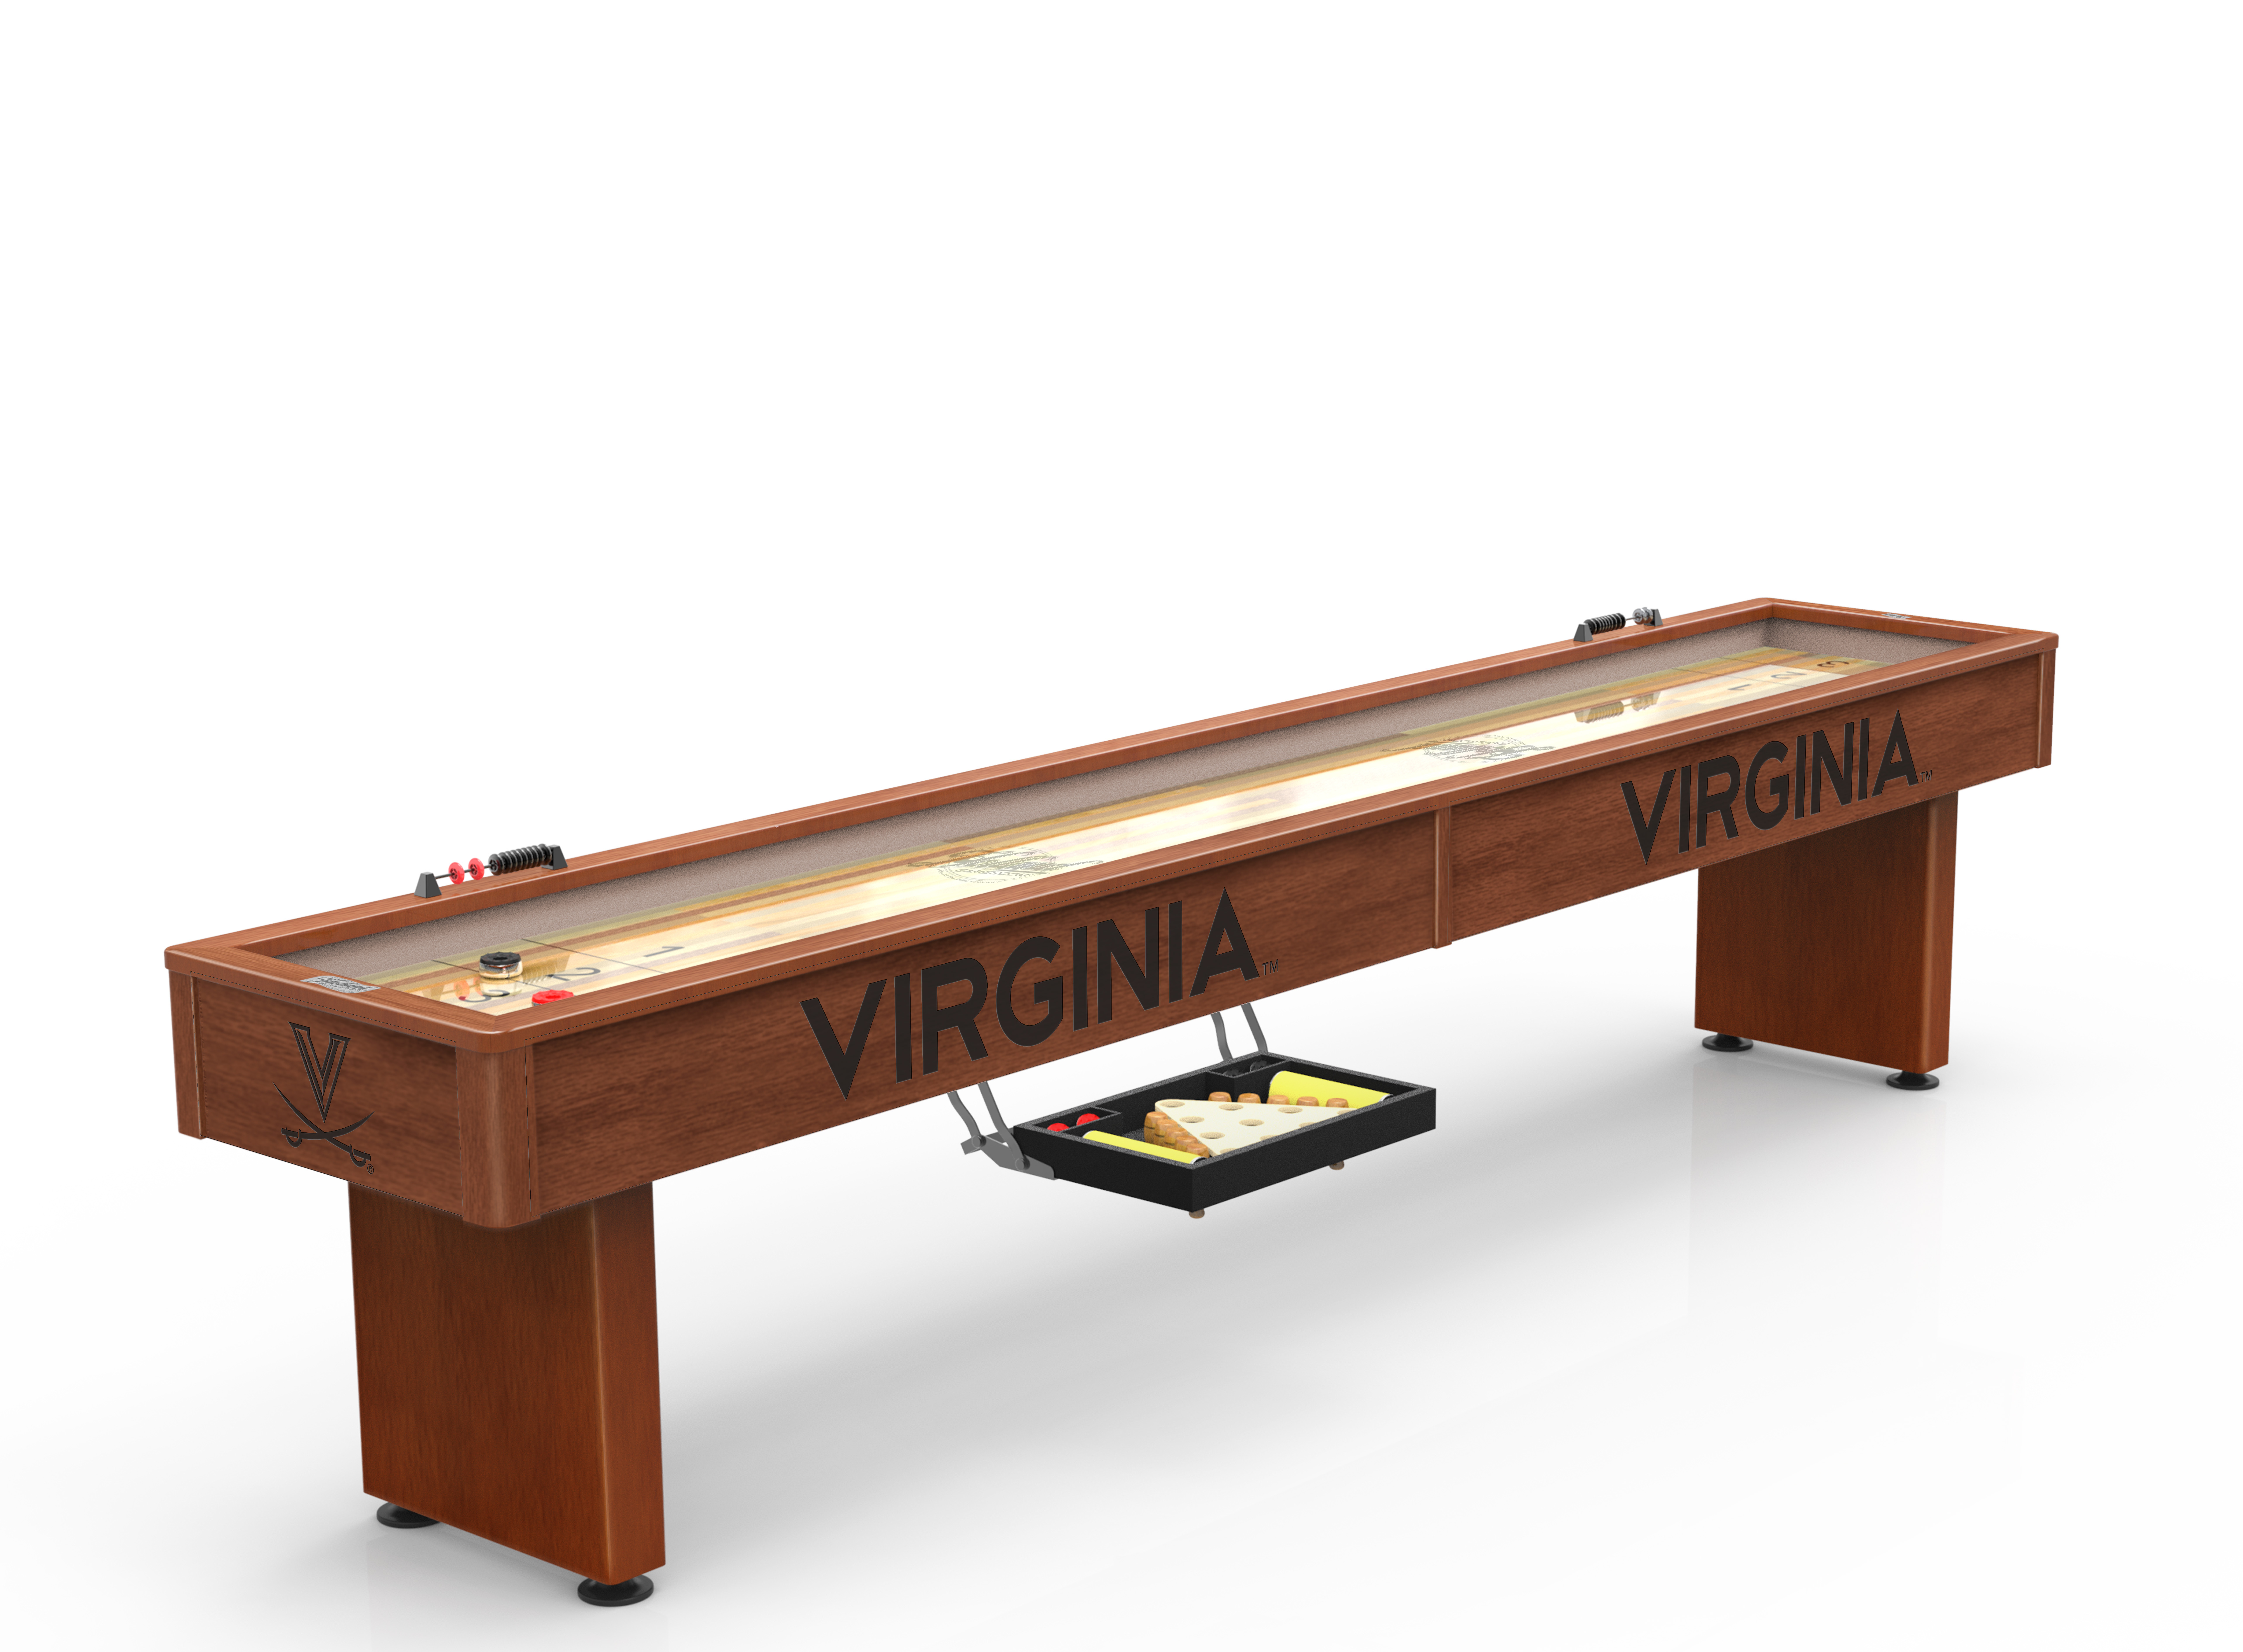 Picture of Holland Bar Stool SB12ChrdVrgnia Virginia 12 ft. Shuffleboard Table